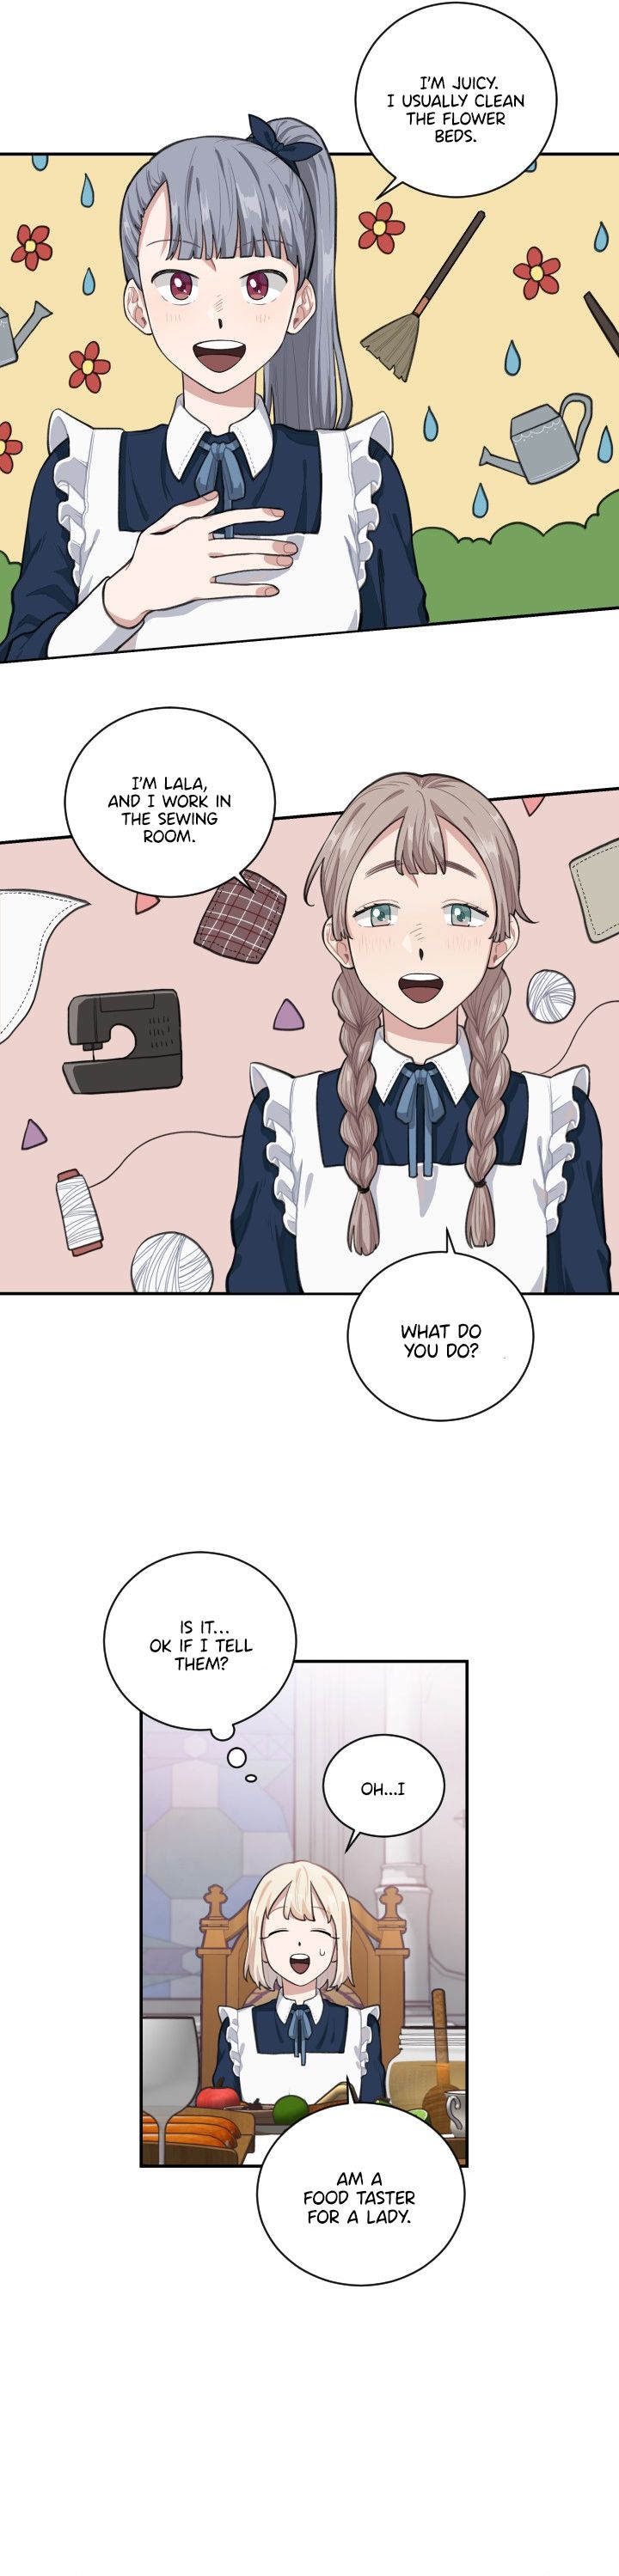 I Became A Maid In A Tl Novel - chapter 5 - #5